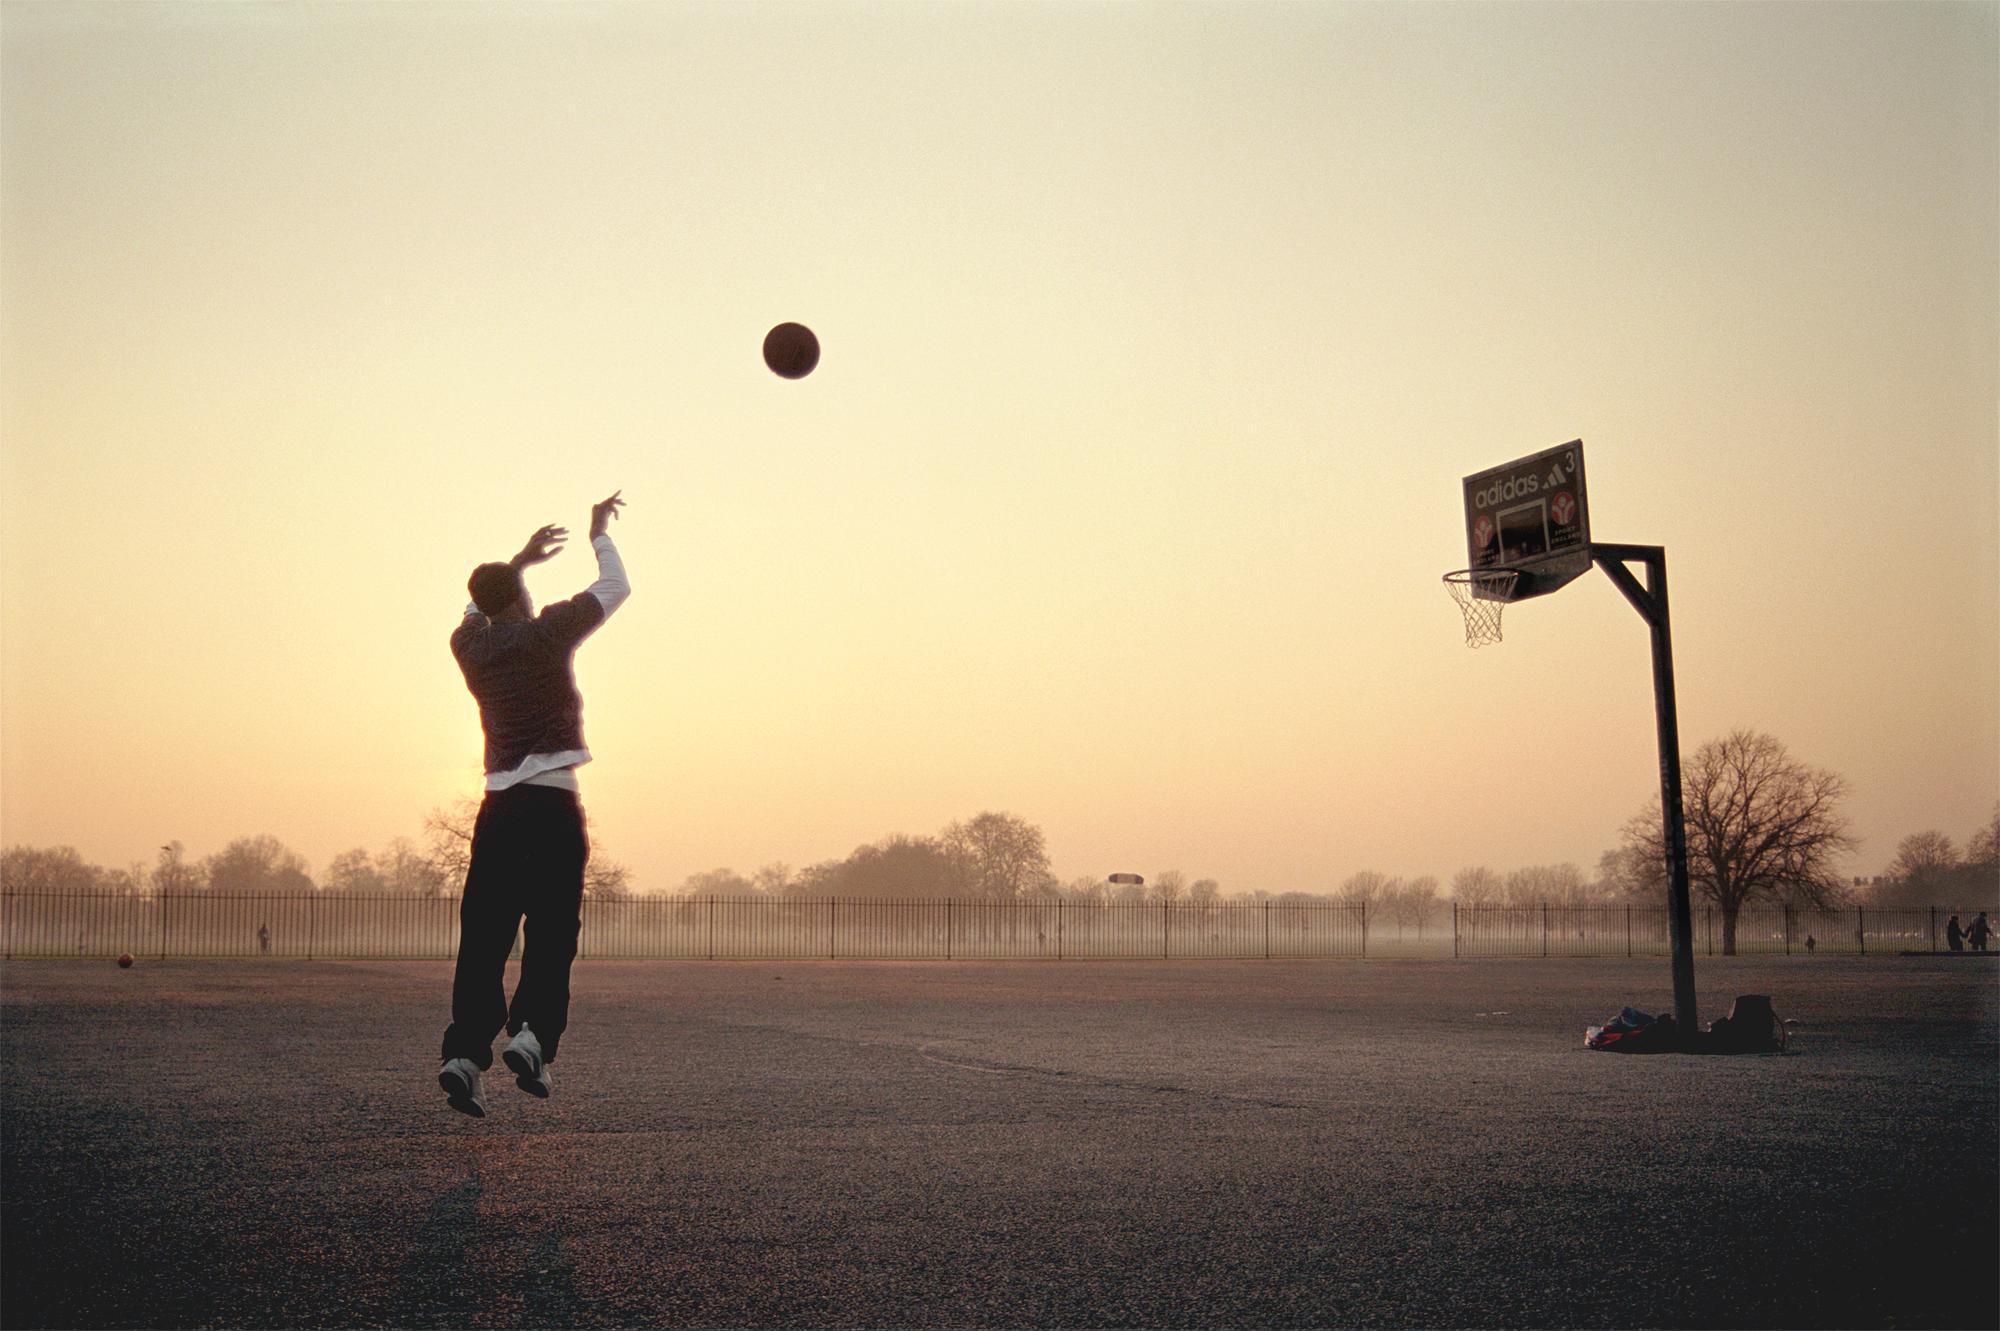 Please bear in mind that all prints are produced to order and lead times are expected between 15-20 days.

Basketball, Clapham I is a stunning C-Type Print by contemporary photographer Samuel Hicks.
It is in an Edition of 25 in this size, and sold